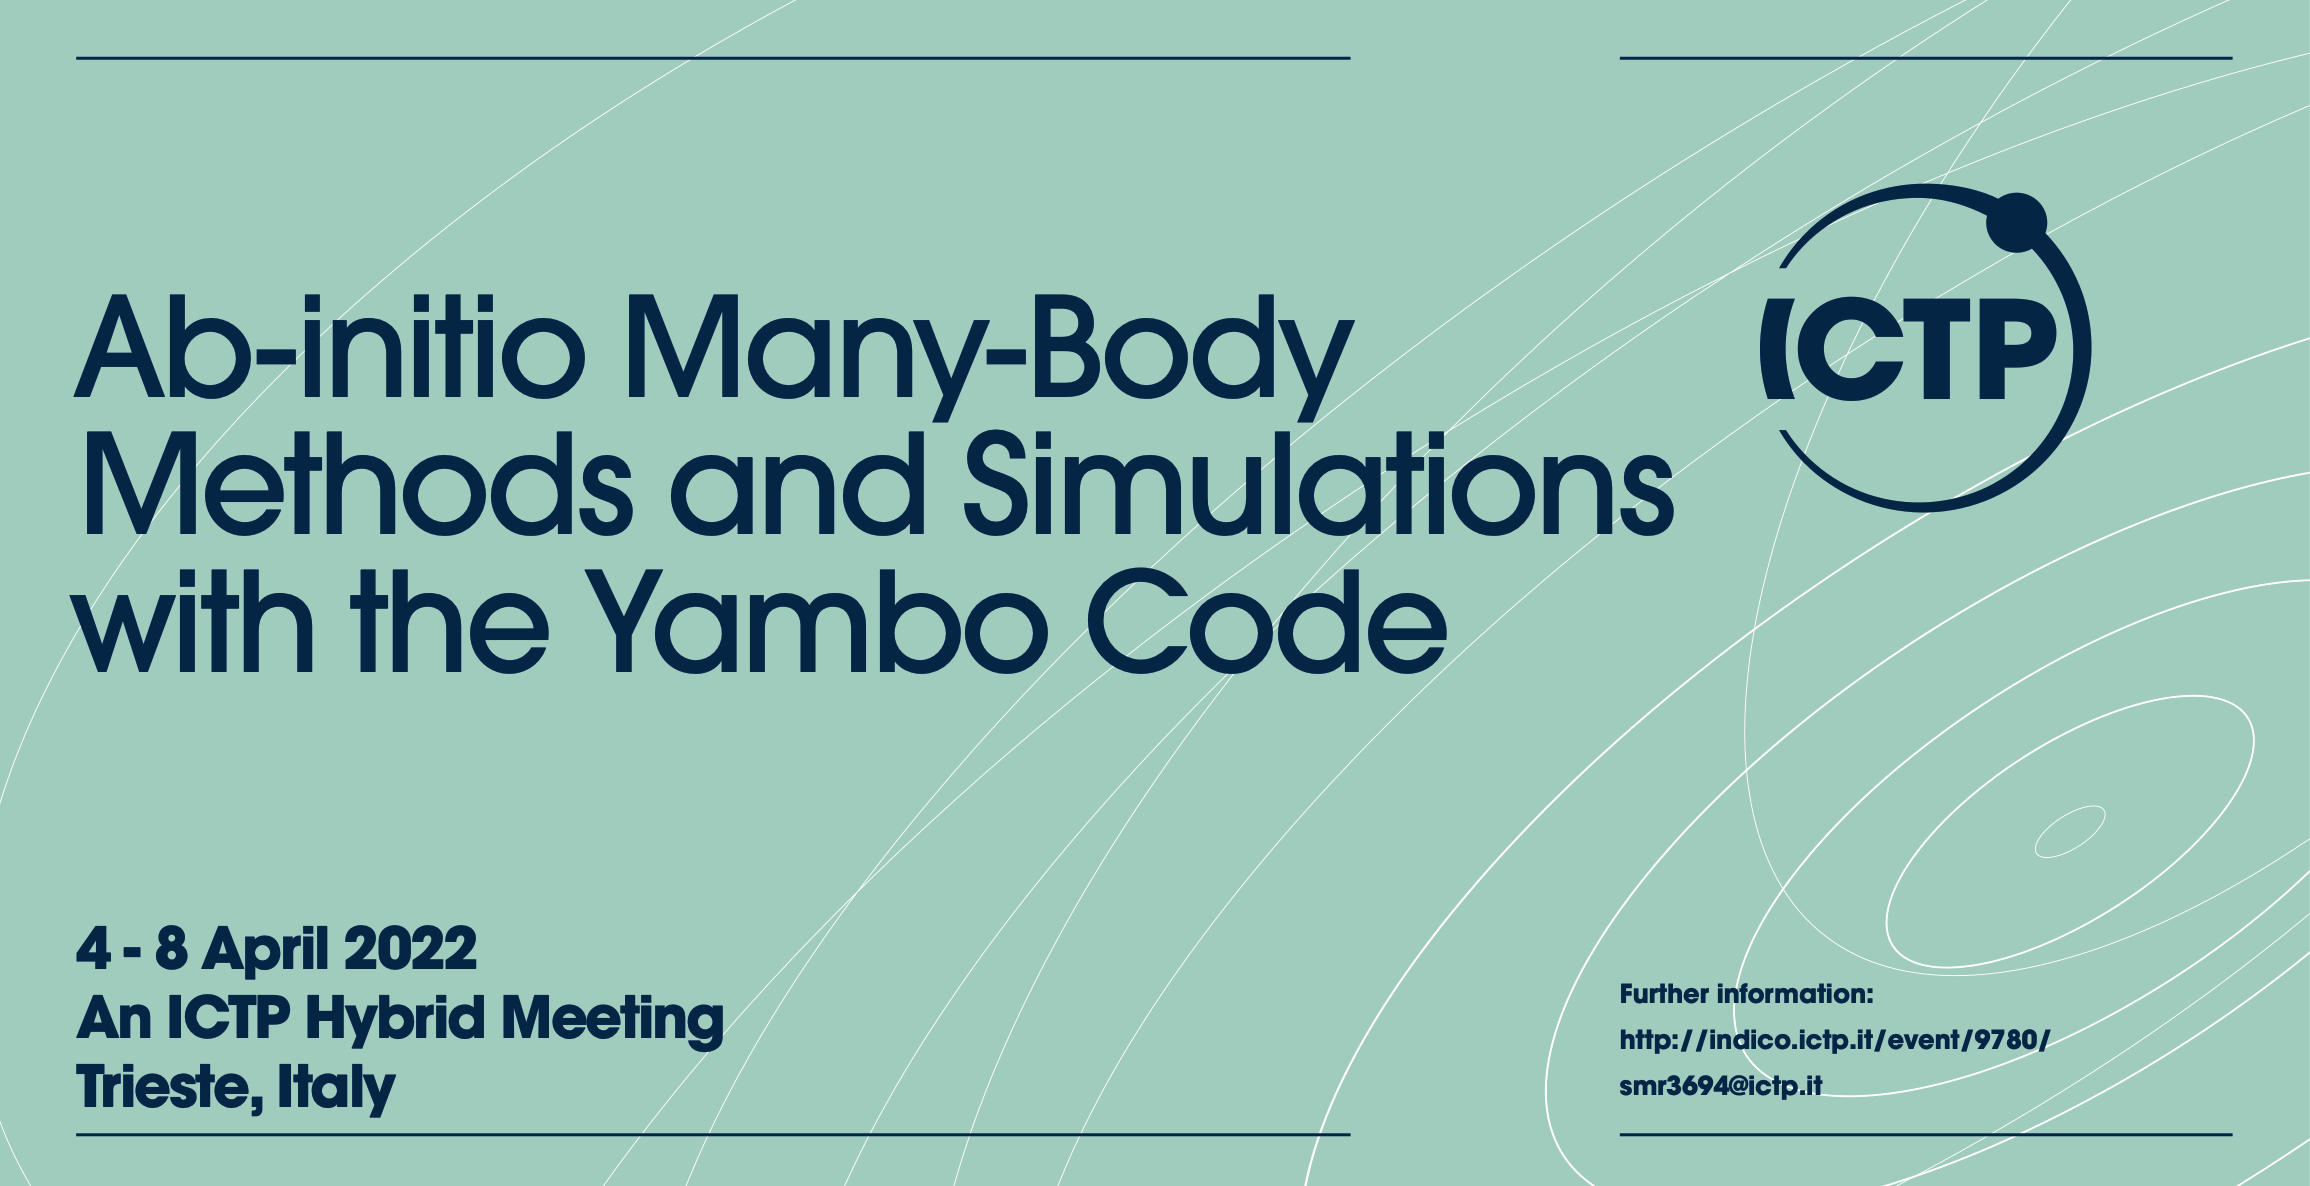 Ab-initio Many-body methods and simulations with the yambo code